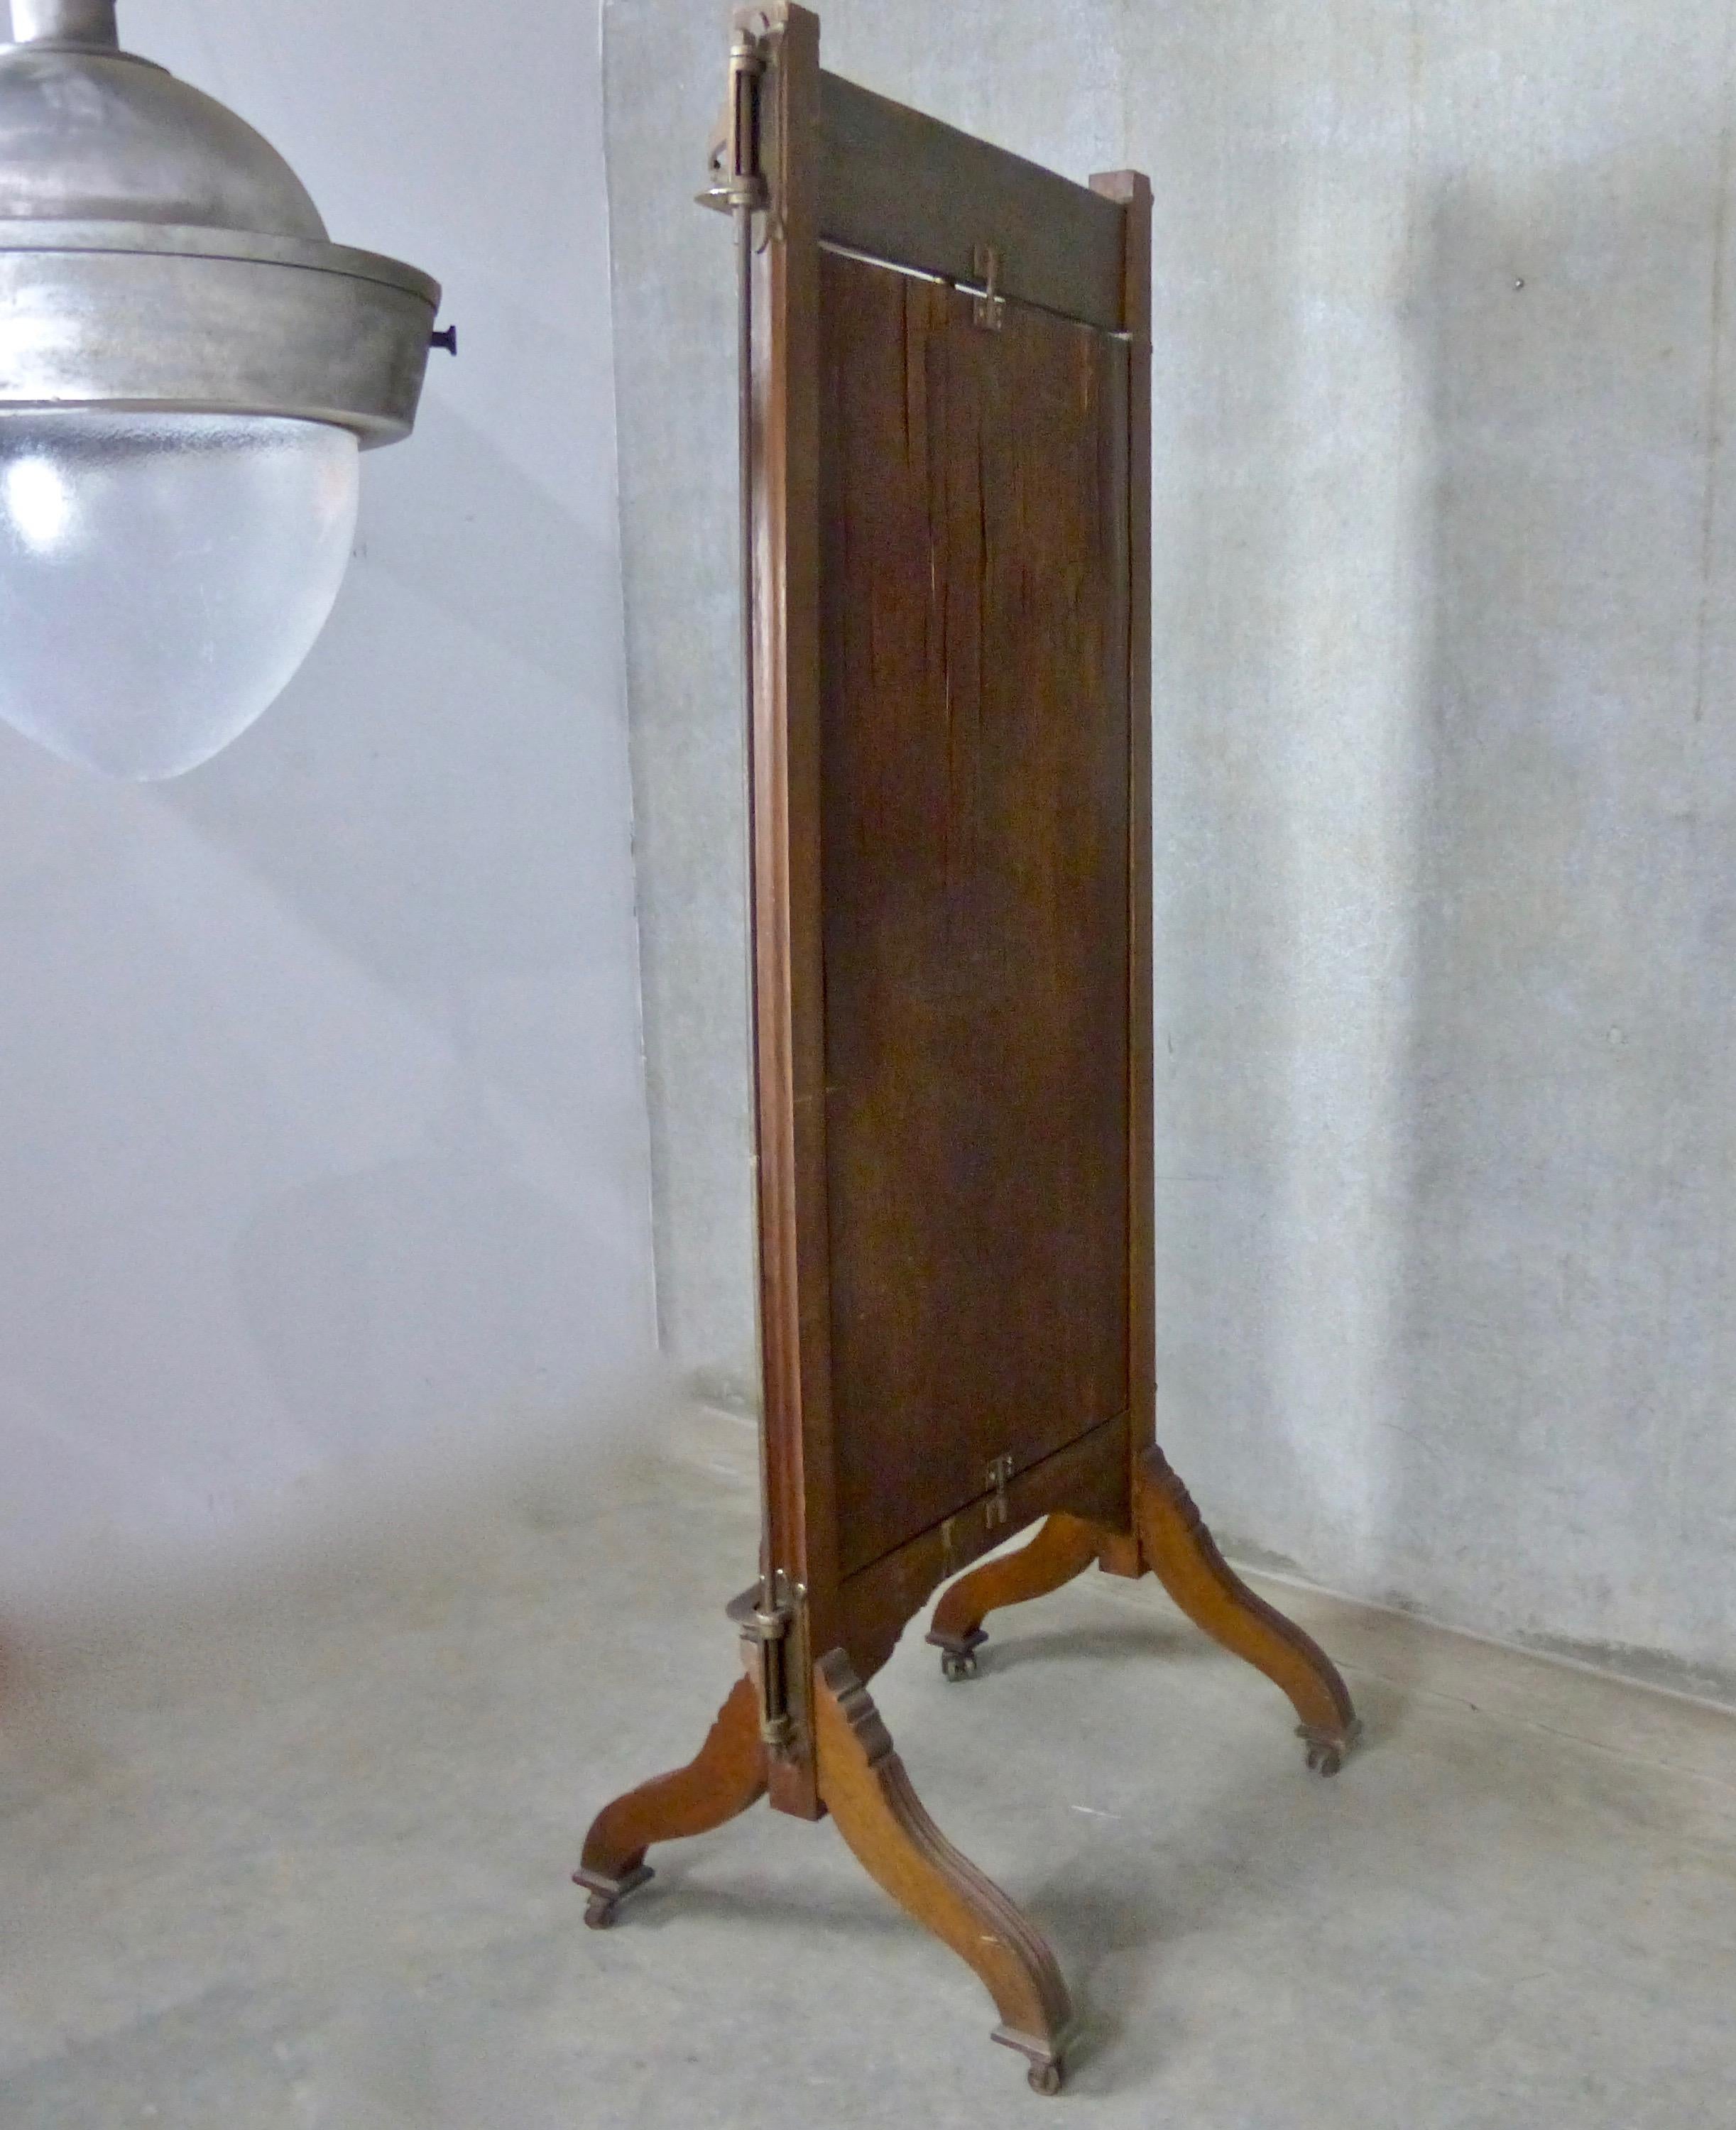 A circa 1890 tri-fold mahogany vanity mirror on wheels. Made by John Willard, New York City, the freestanding mirror features nicely carved details in the wood plus cast iron articulating arms. Folds into a compact, single panel to save space when